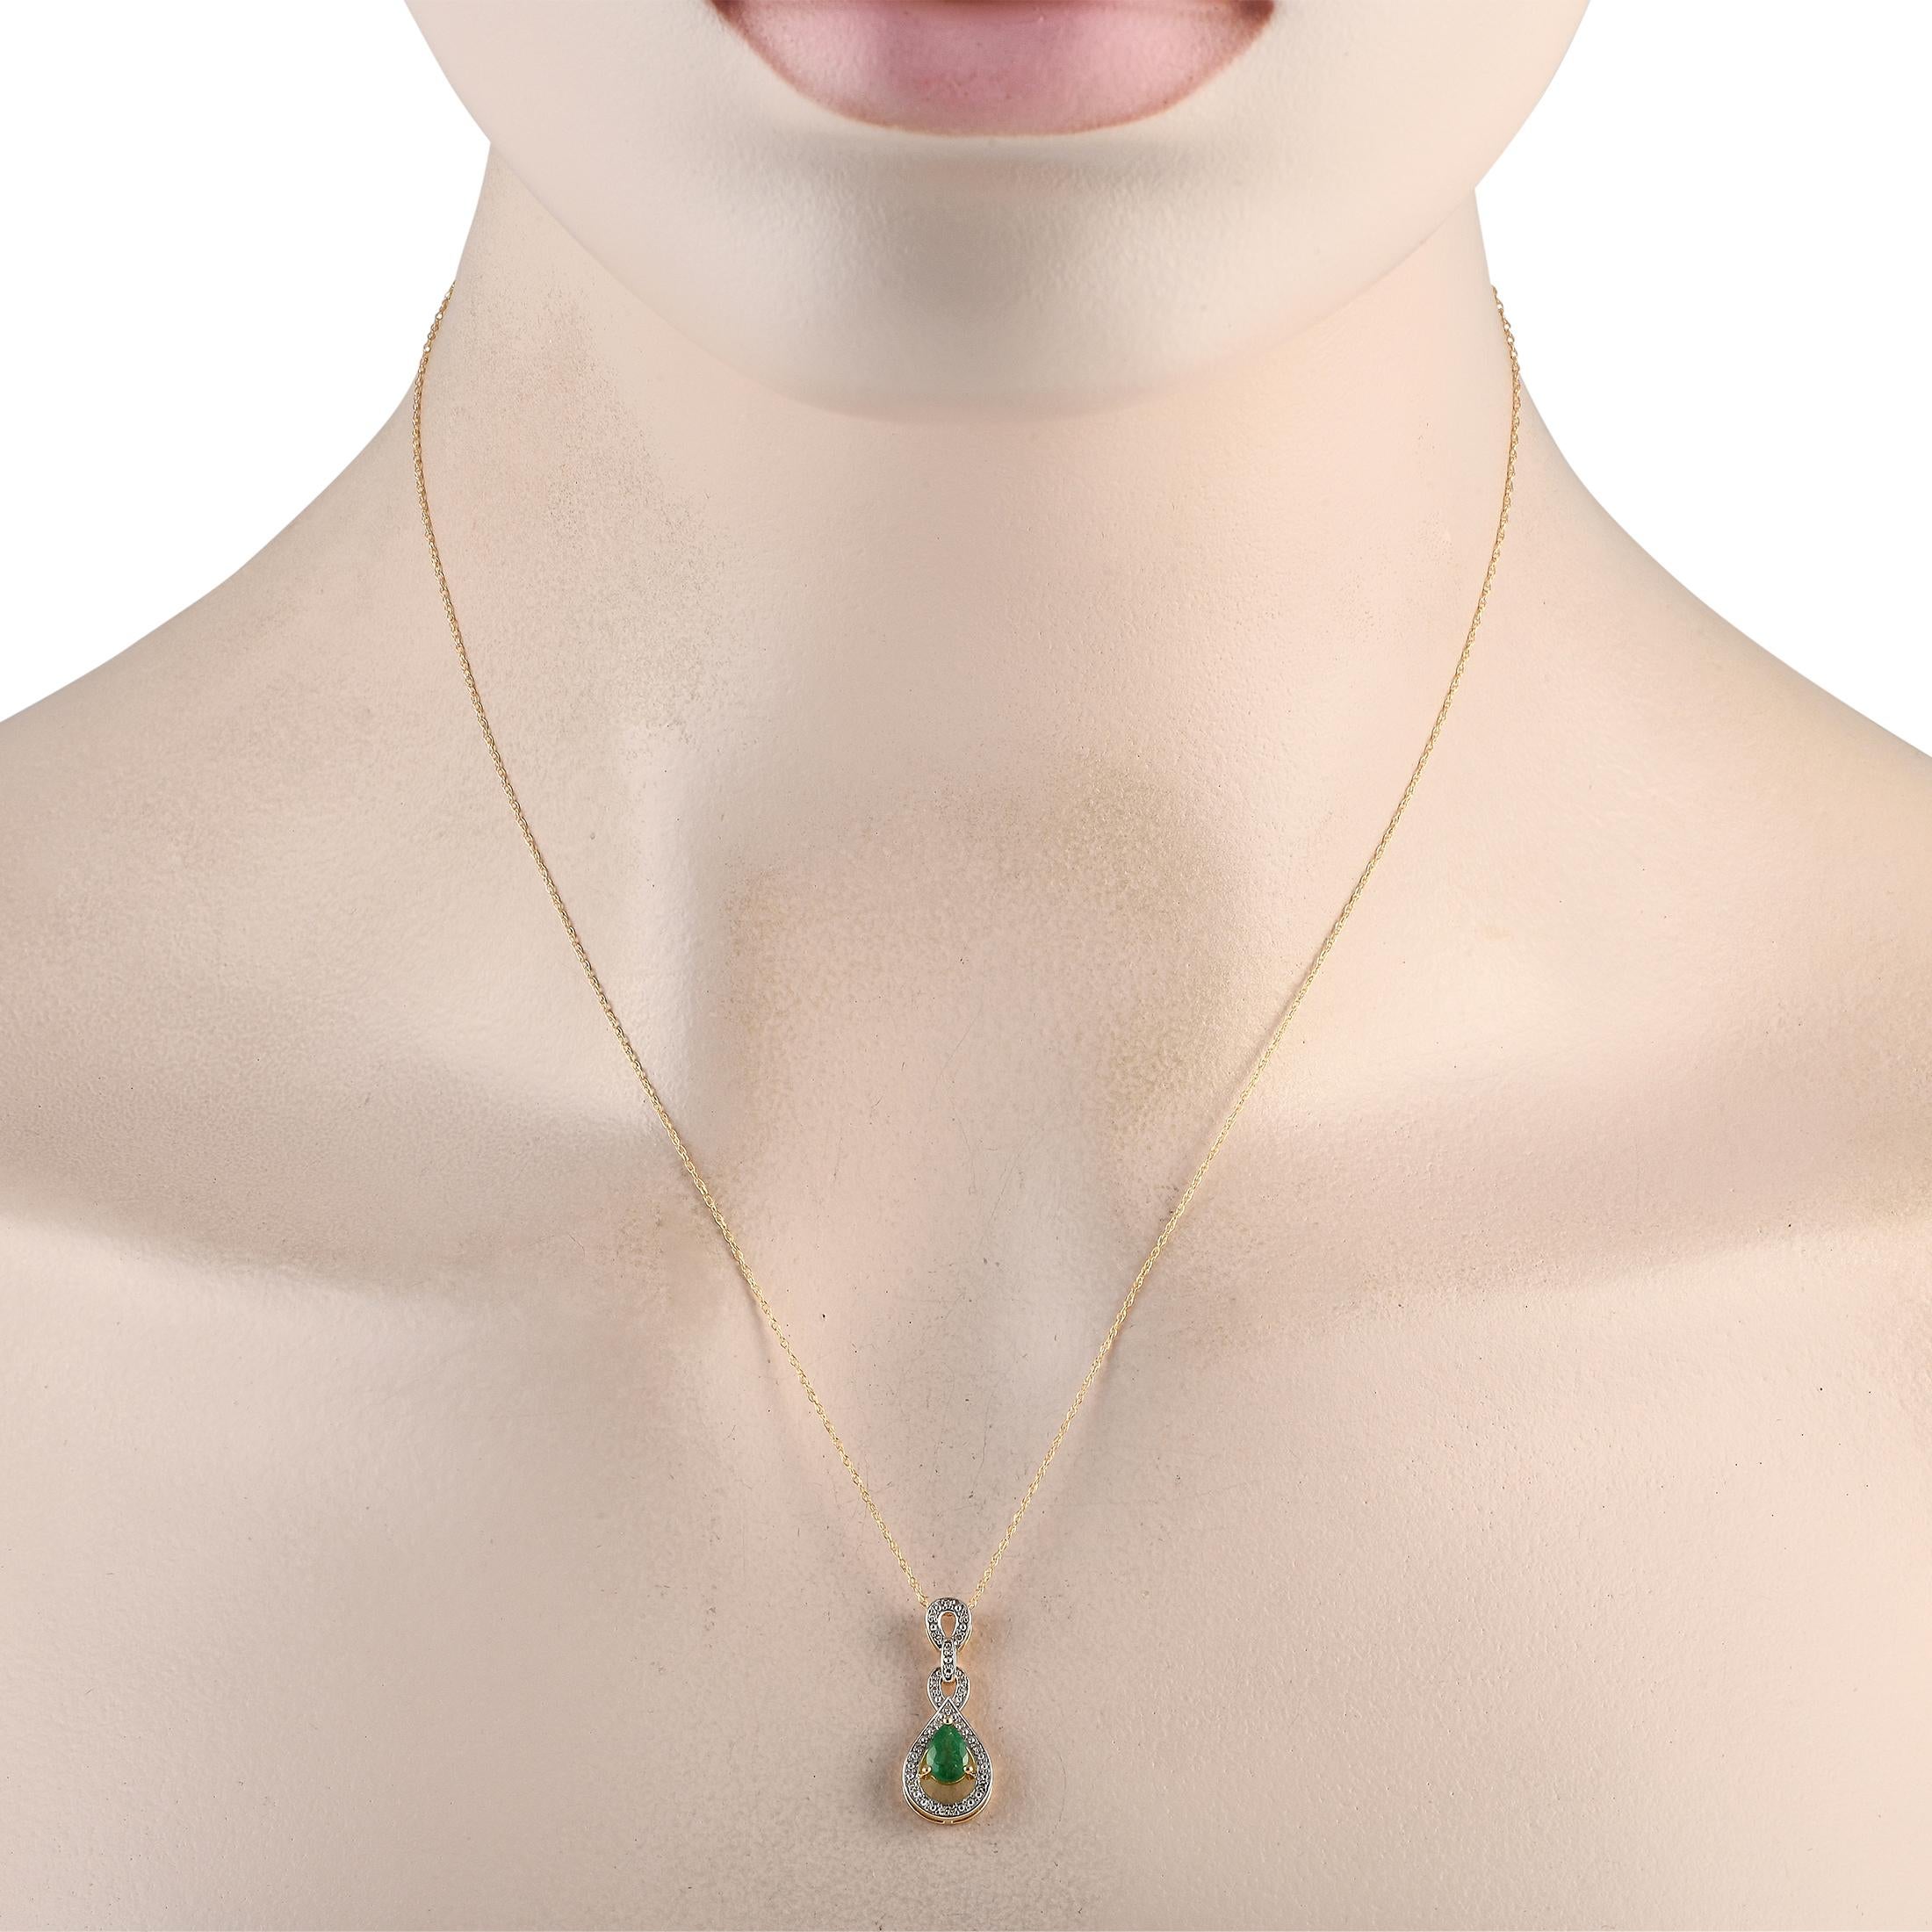 A beautiful emerald center stone adds color and dimension to this elegant, understated necklace. On this pieces intricate 14K yellow gold pendant  which measures 0.85 long by 0.45 wide  additional diamond accents totaling 0.08 carats provide the